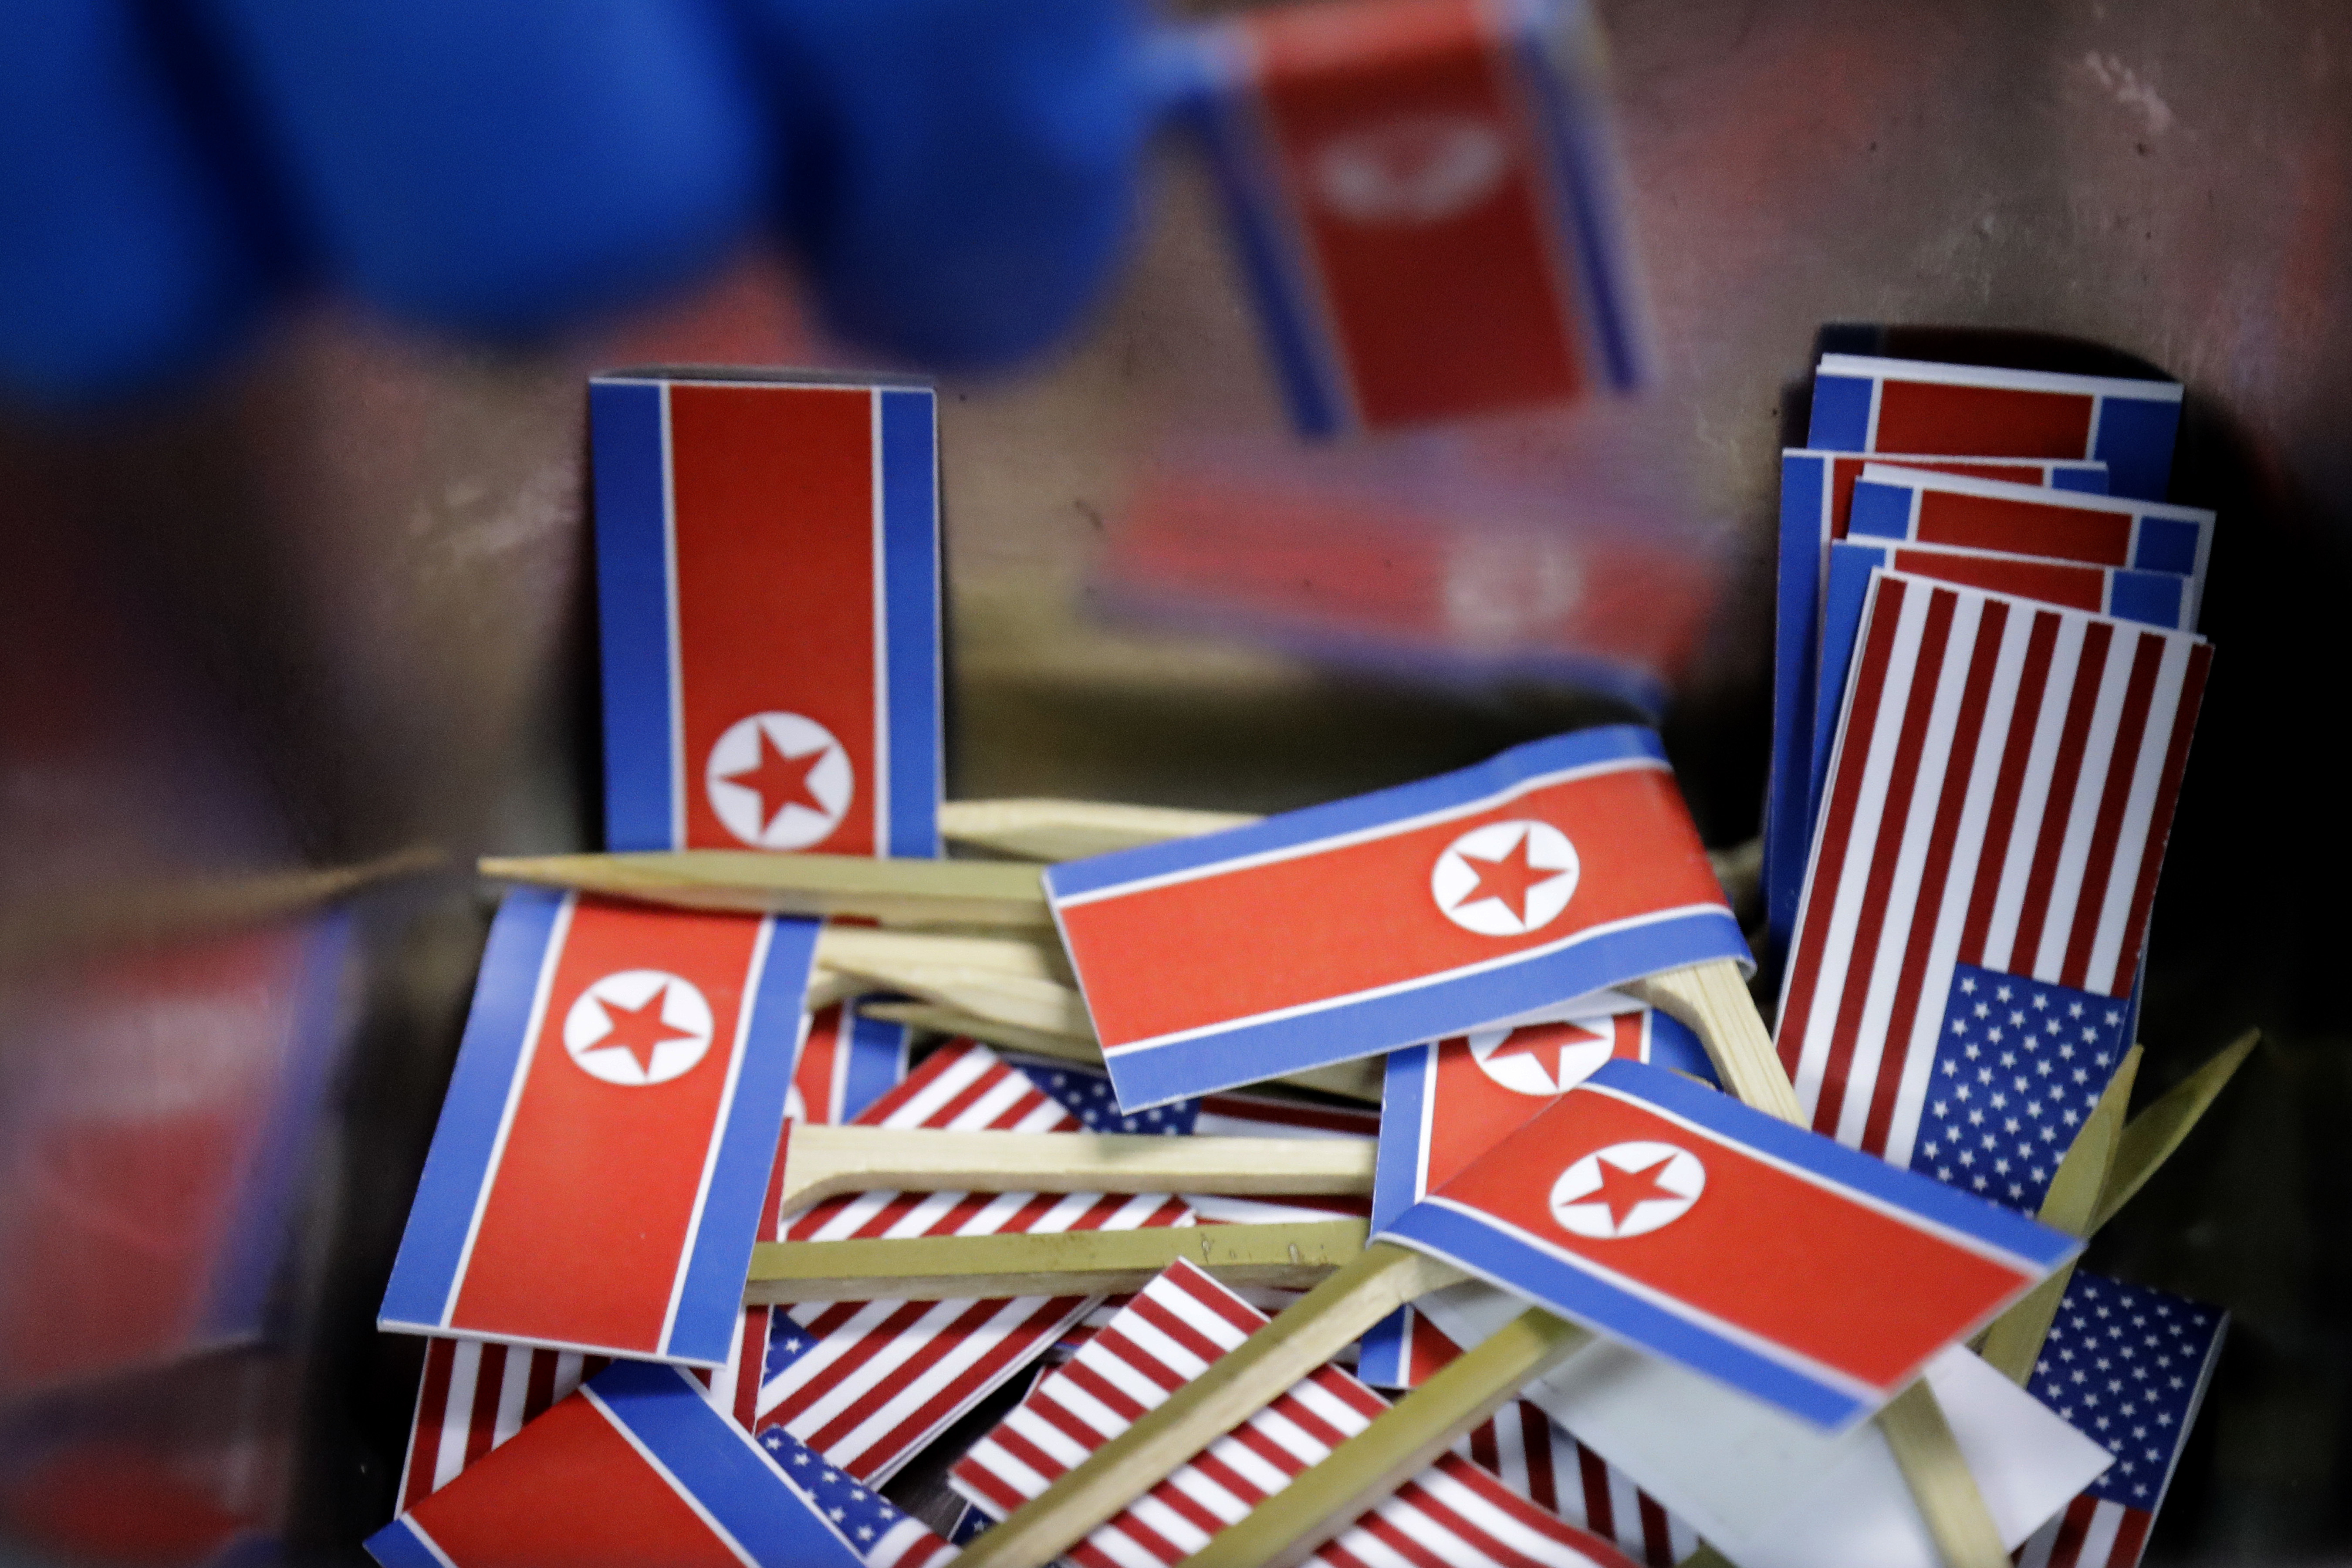 In this June 7, 2018, photo, miniature American and North Korean flags are piled together and used to decorate the 